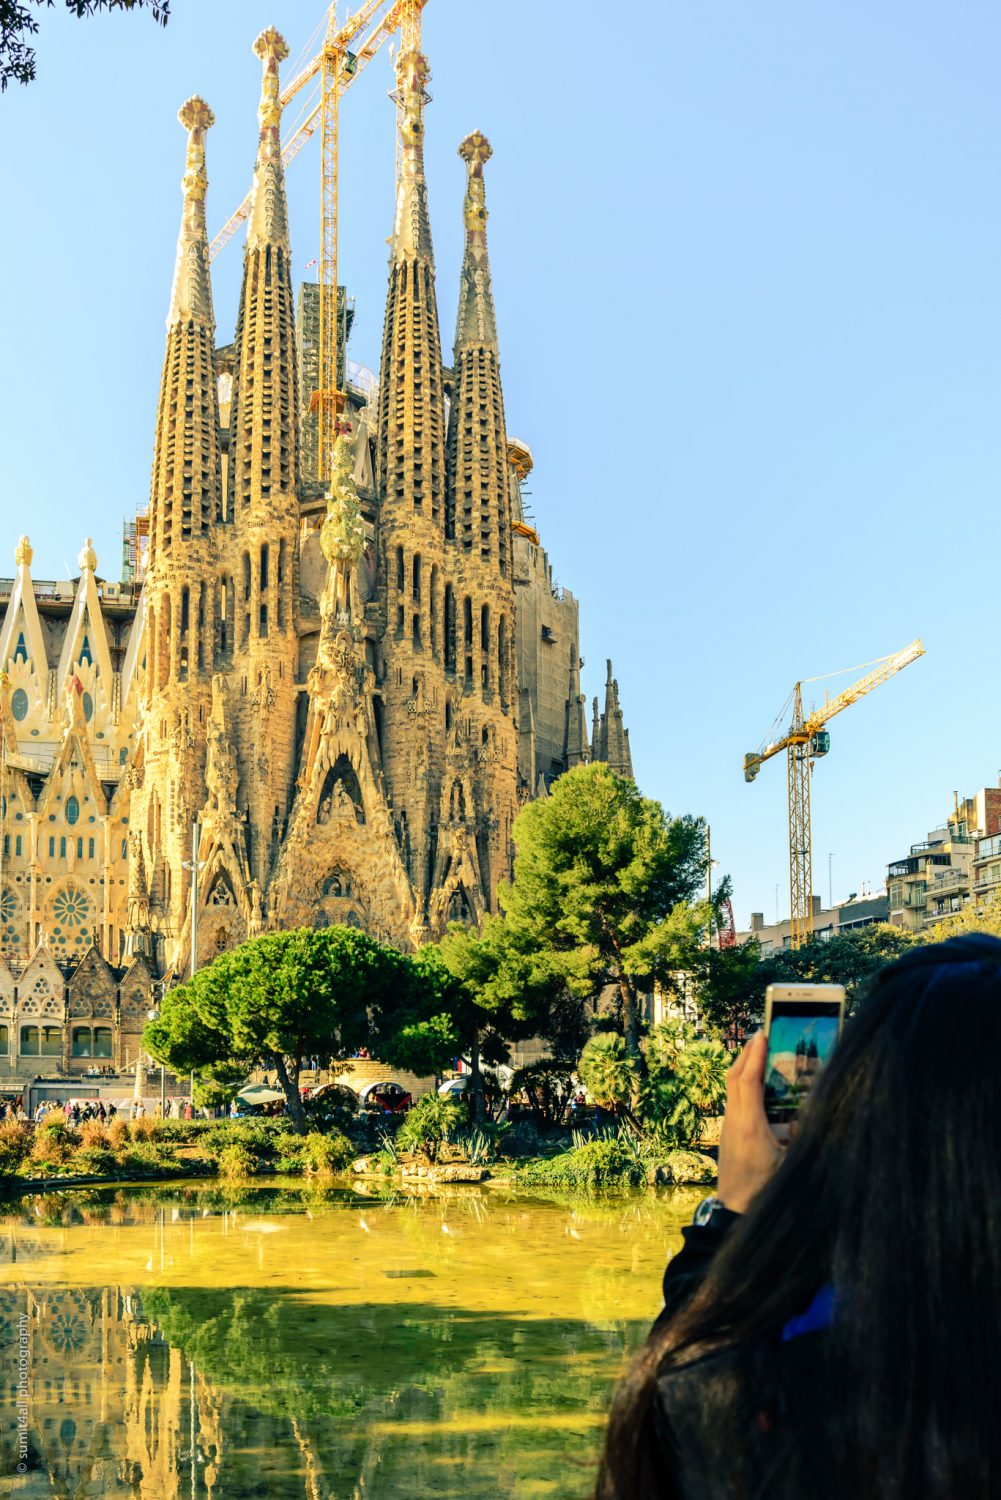 The Sagrada Familia is now one of the most visited tourist spots in Europe